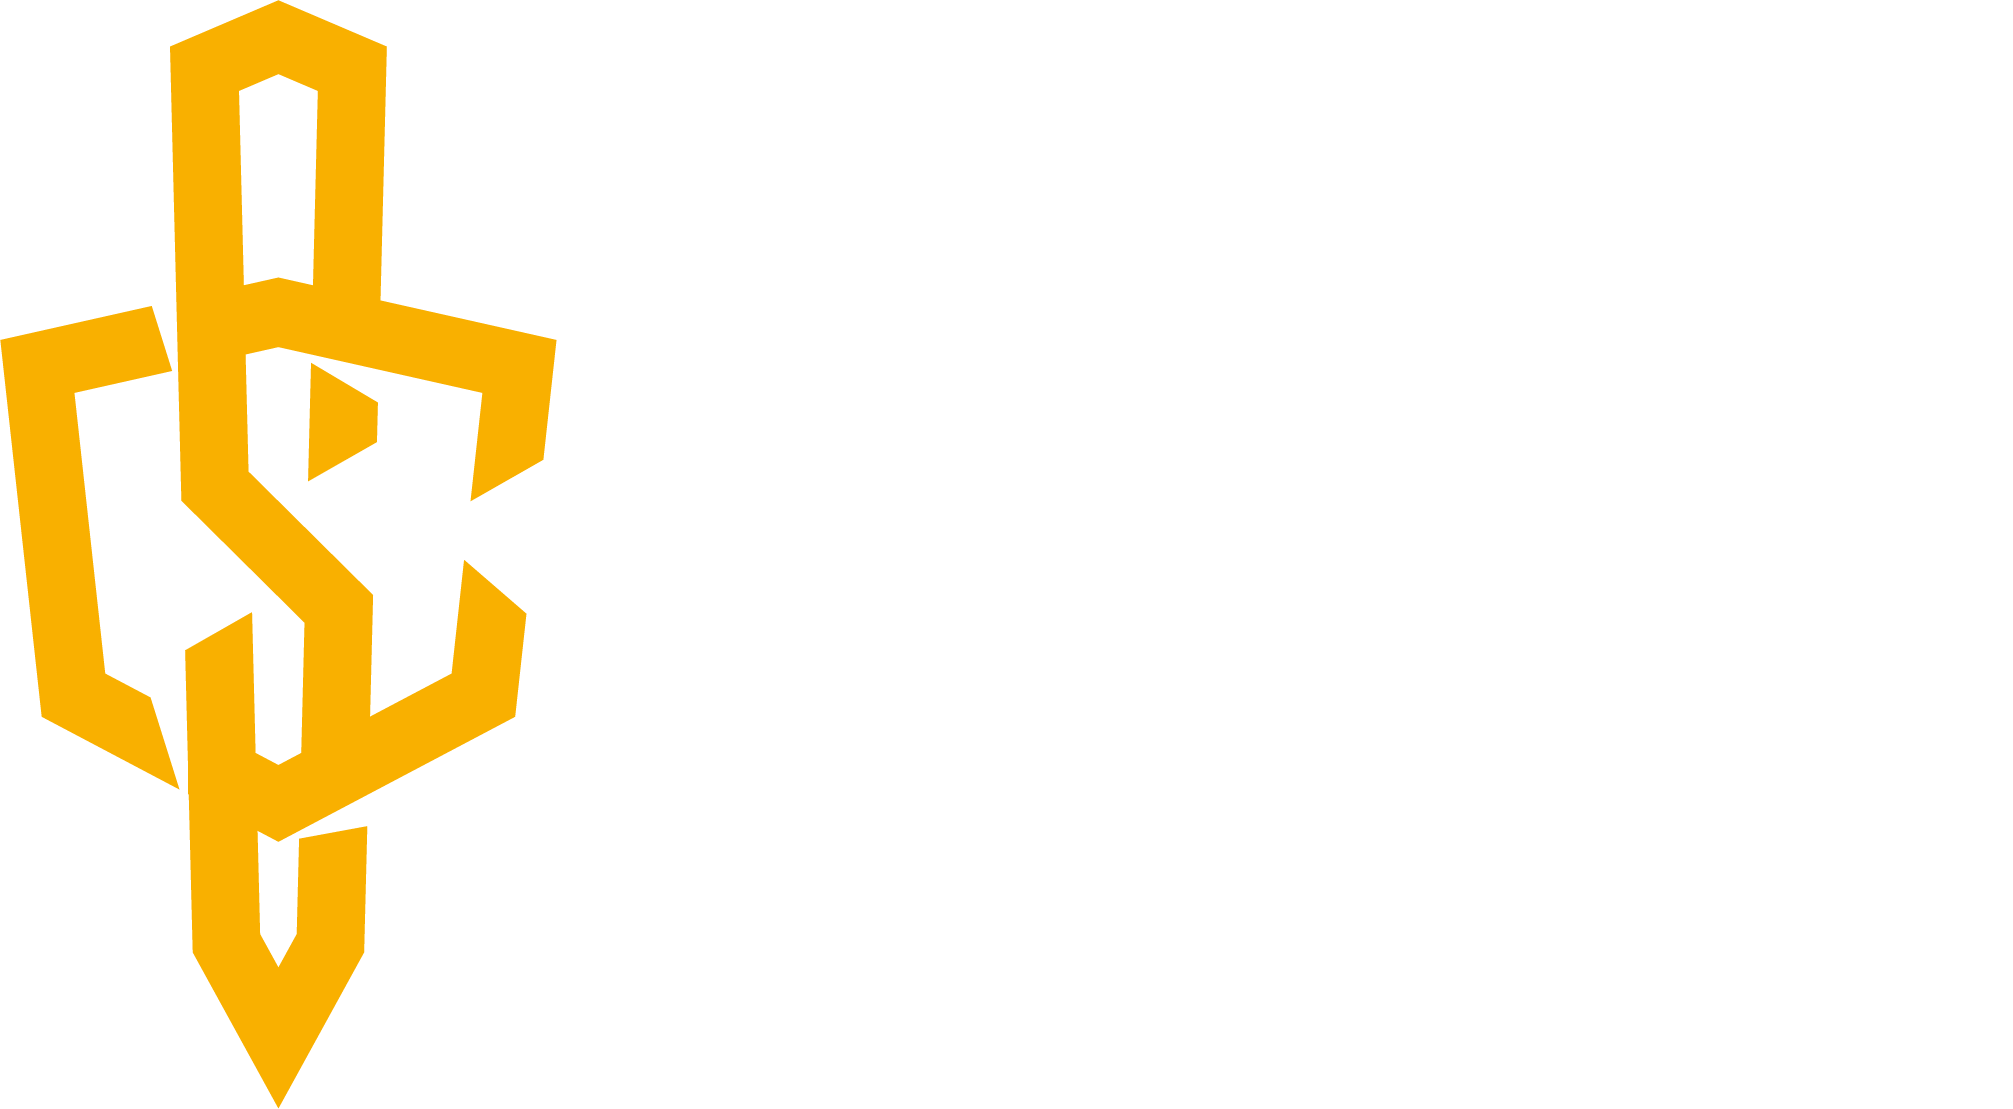 Combat Systems